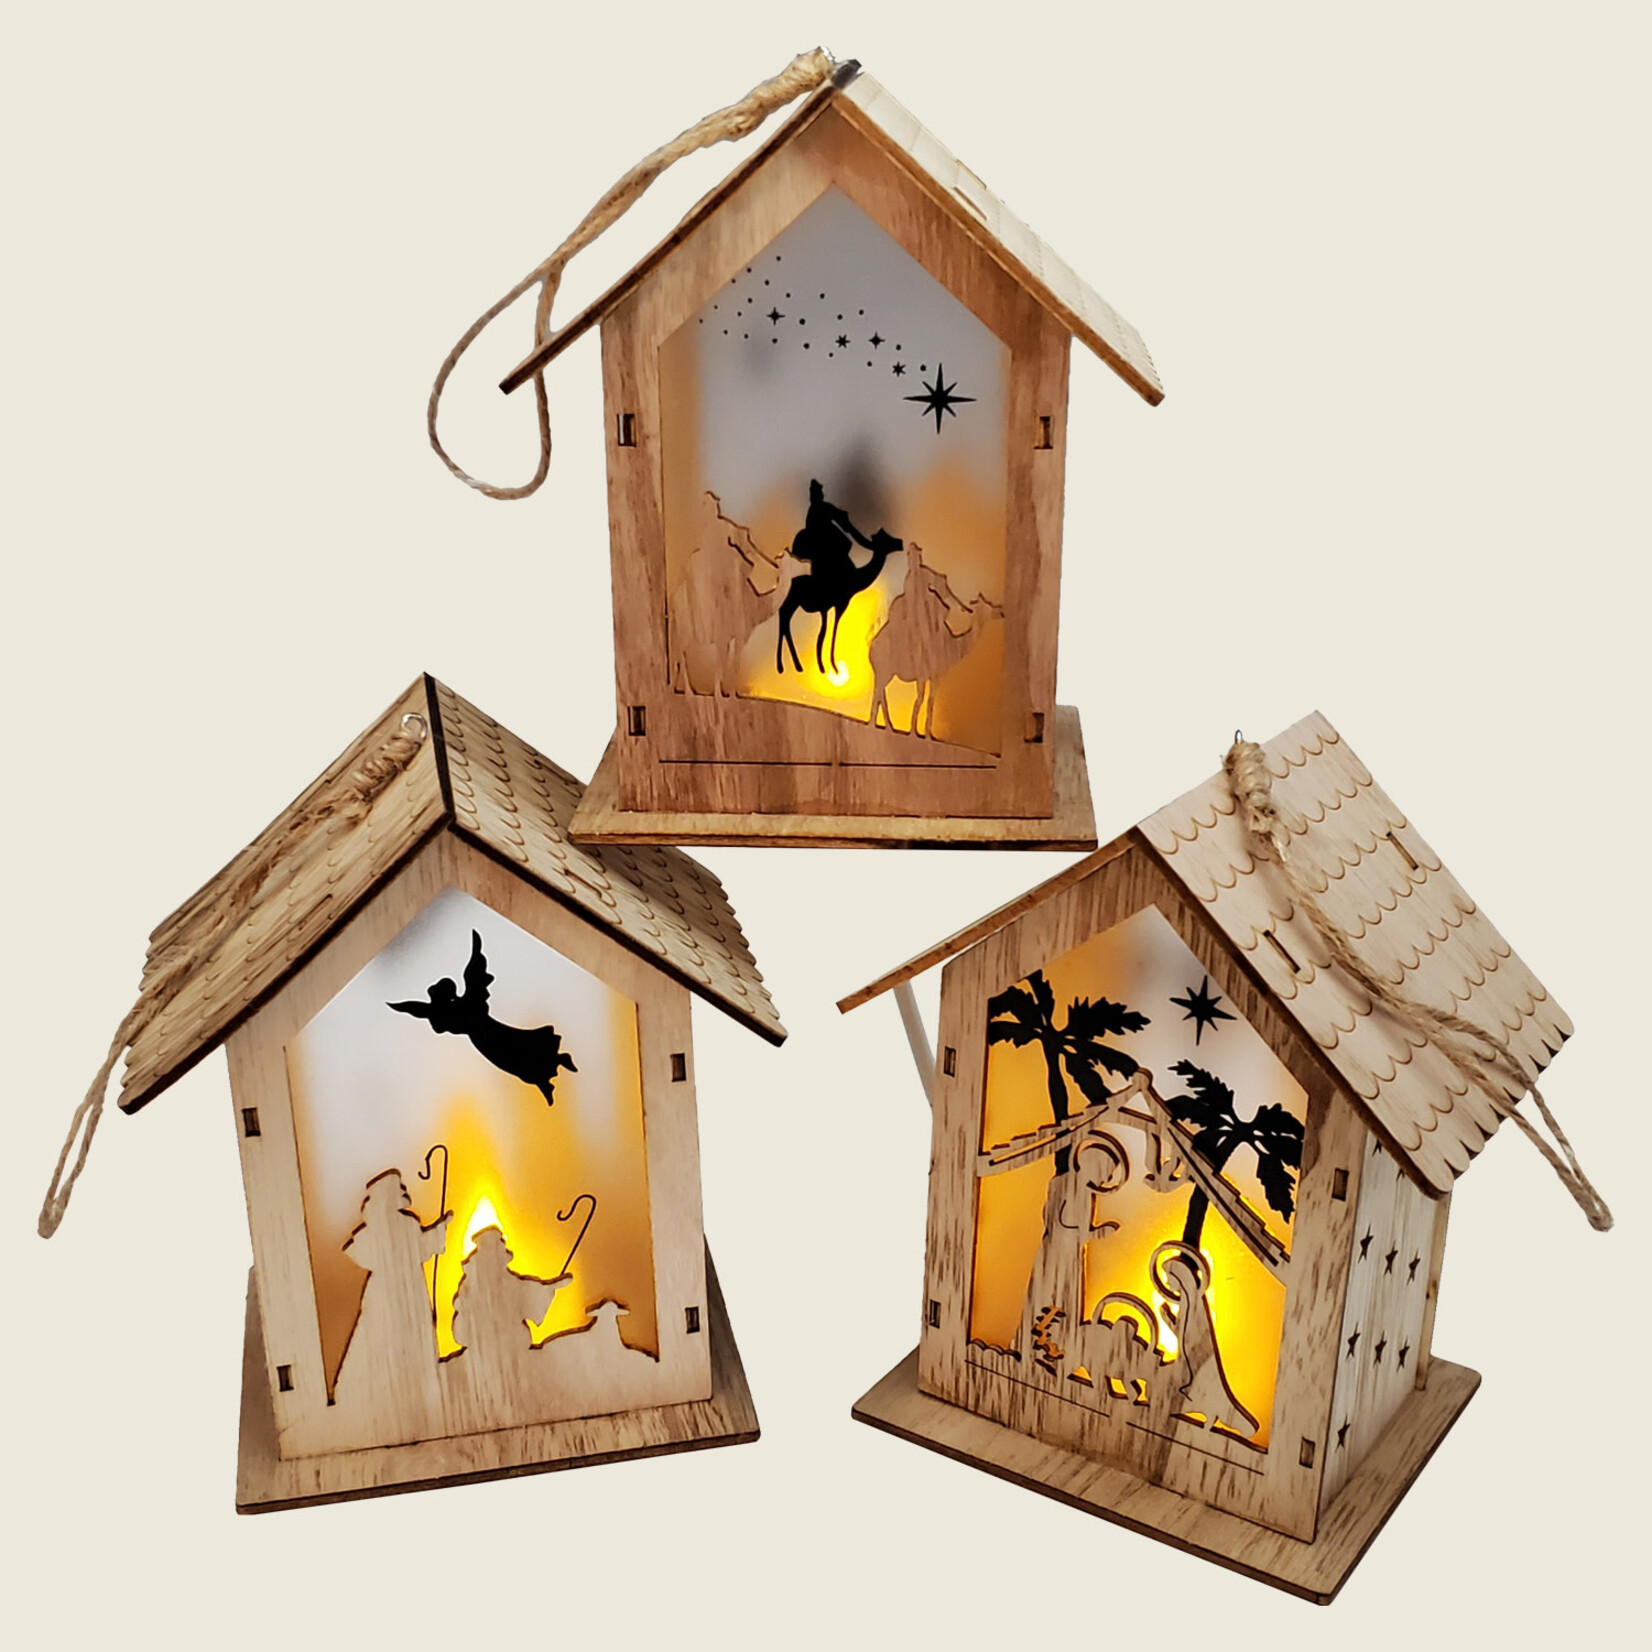 RLN076 - Nativity House Ornaments with Flicker Lights (Set of 3 )